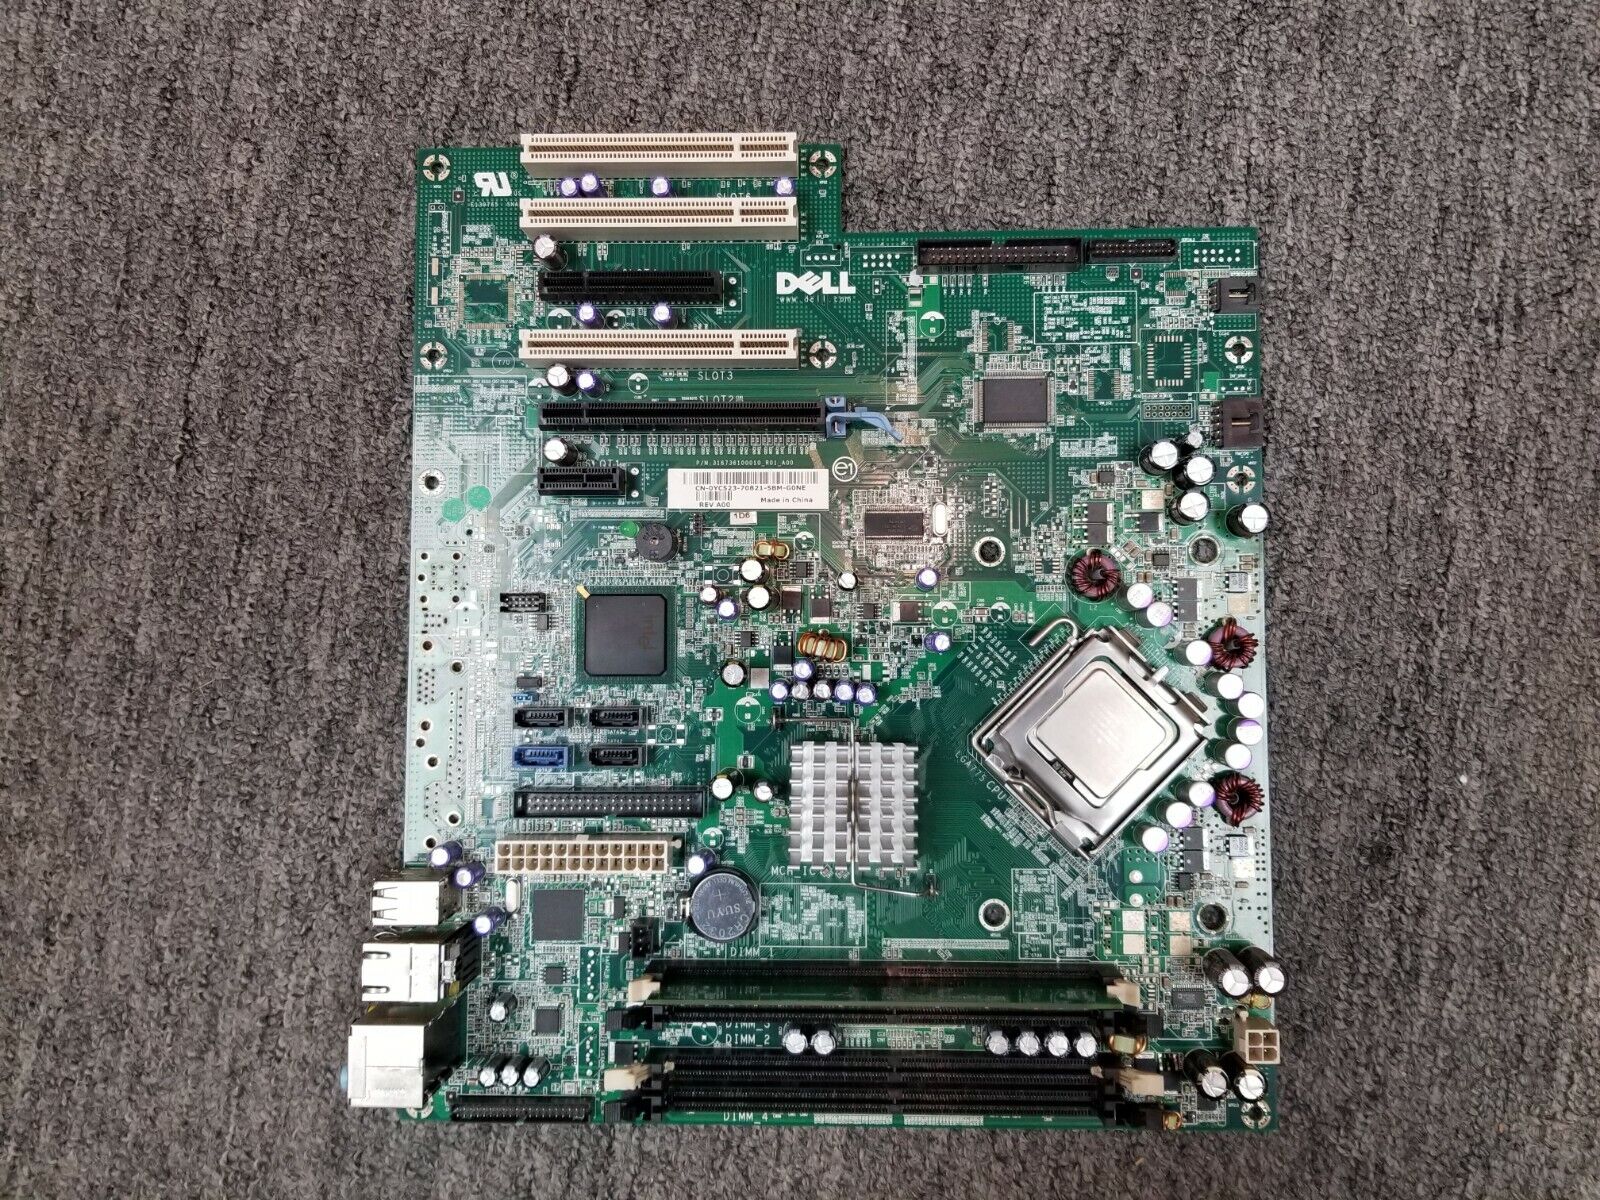 Dell XPS 400 / Dimension 9150 Motherboard  + Pentium D 2.8ghz CPU 775 1gb Ram